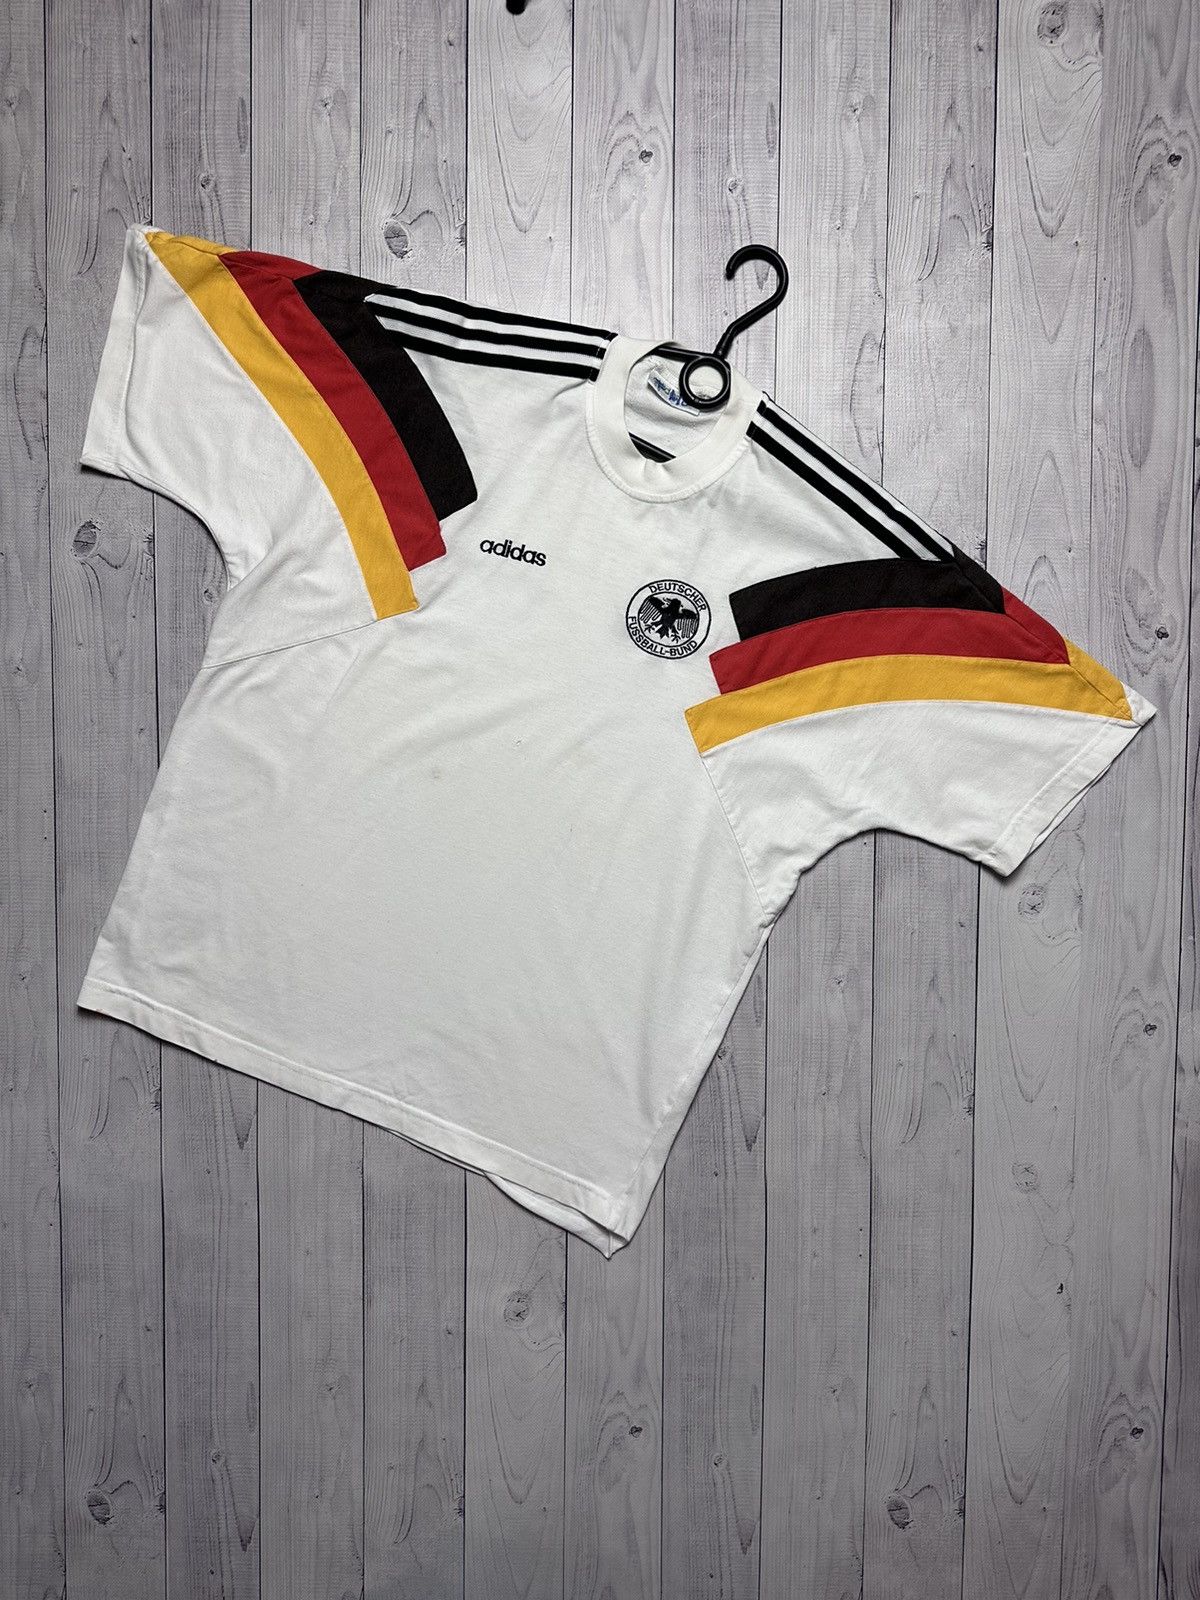 Pre-owned Adidas X Soccer Jersey Vintage Deutschland Soccer Jersey Adidas Size L In White